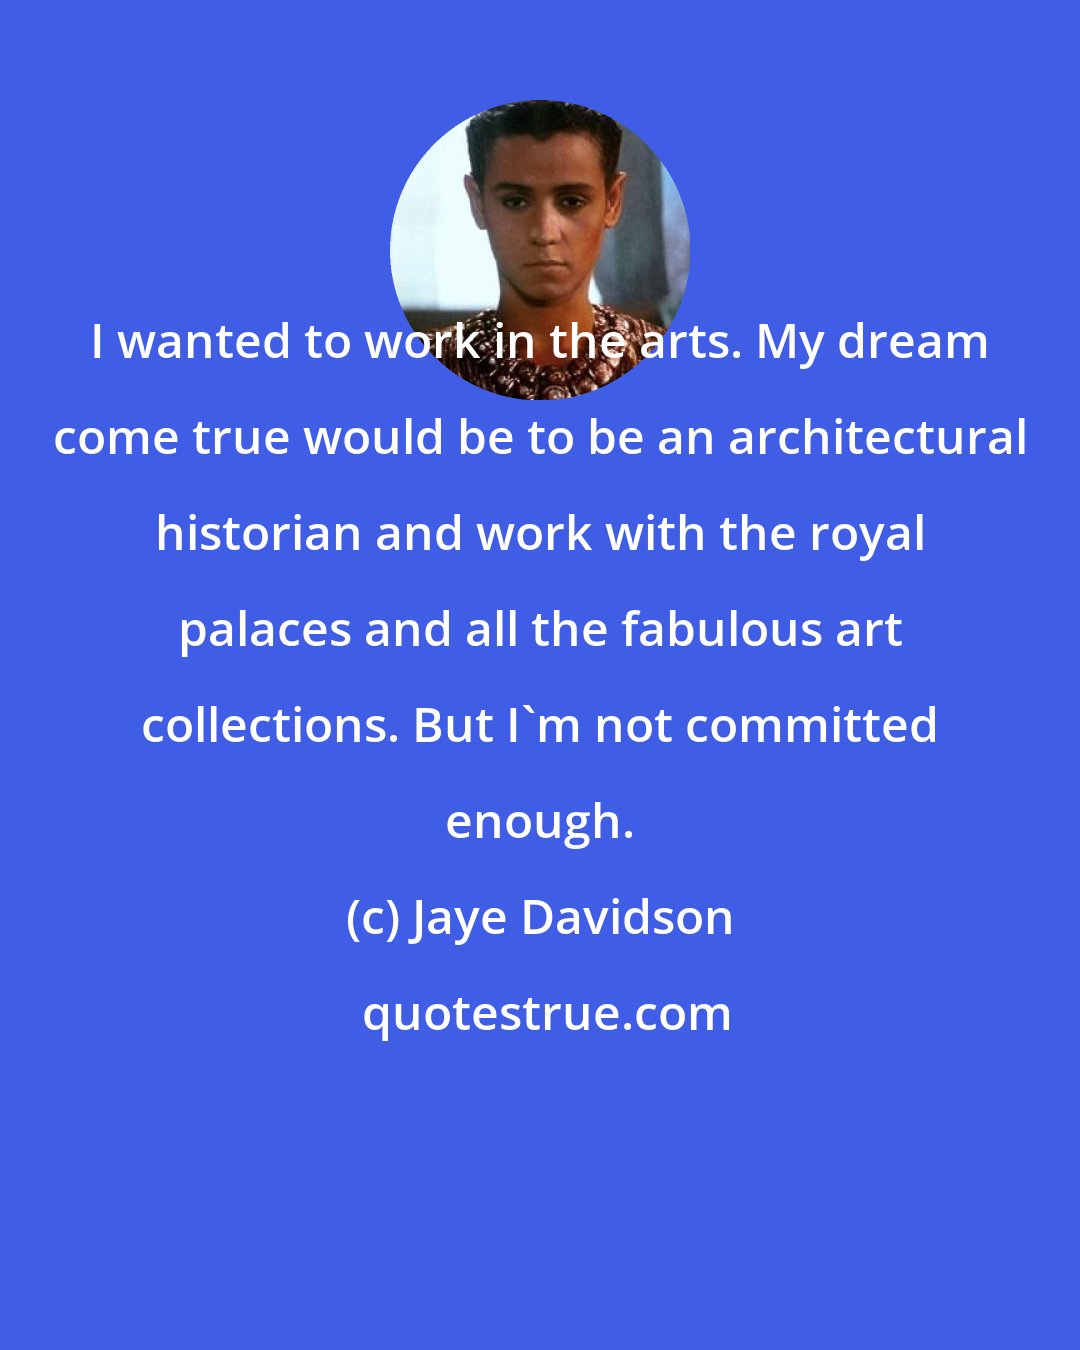 Jaye Davidson: I wanted to work in the arts. My dream come true would be to be an architectural historian and work with the royal palaces and all the fabulous art collections. But I'm not committed enough.